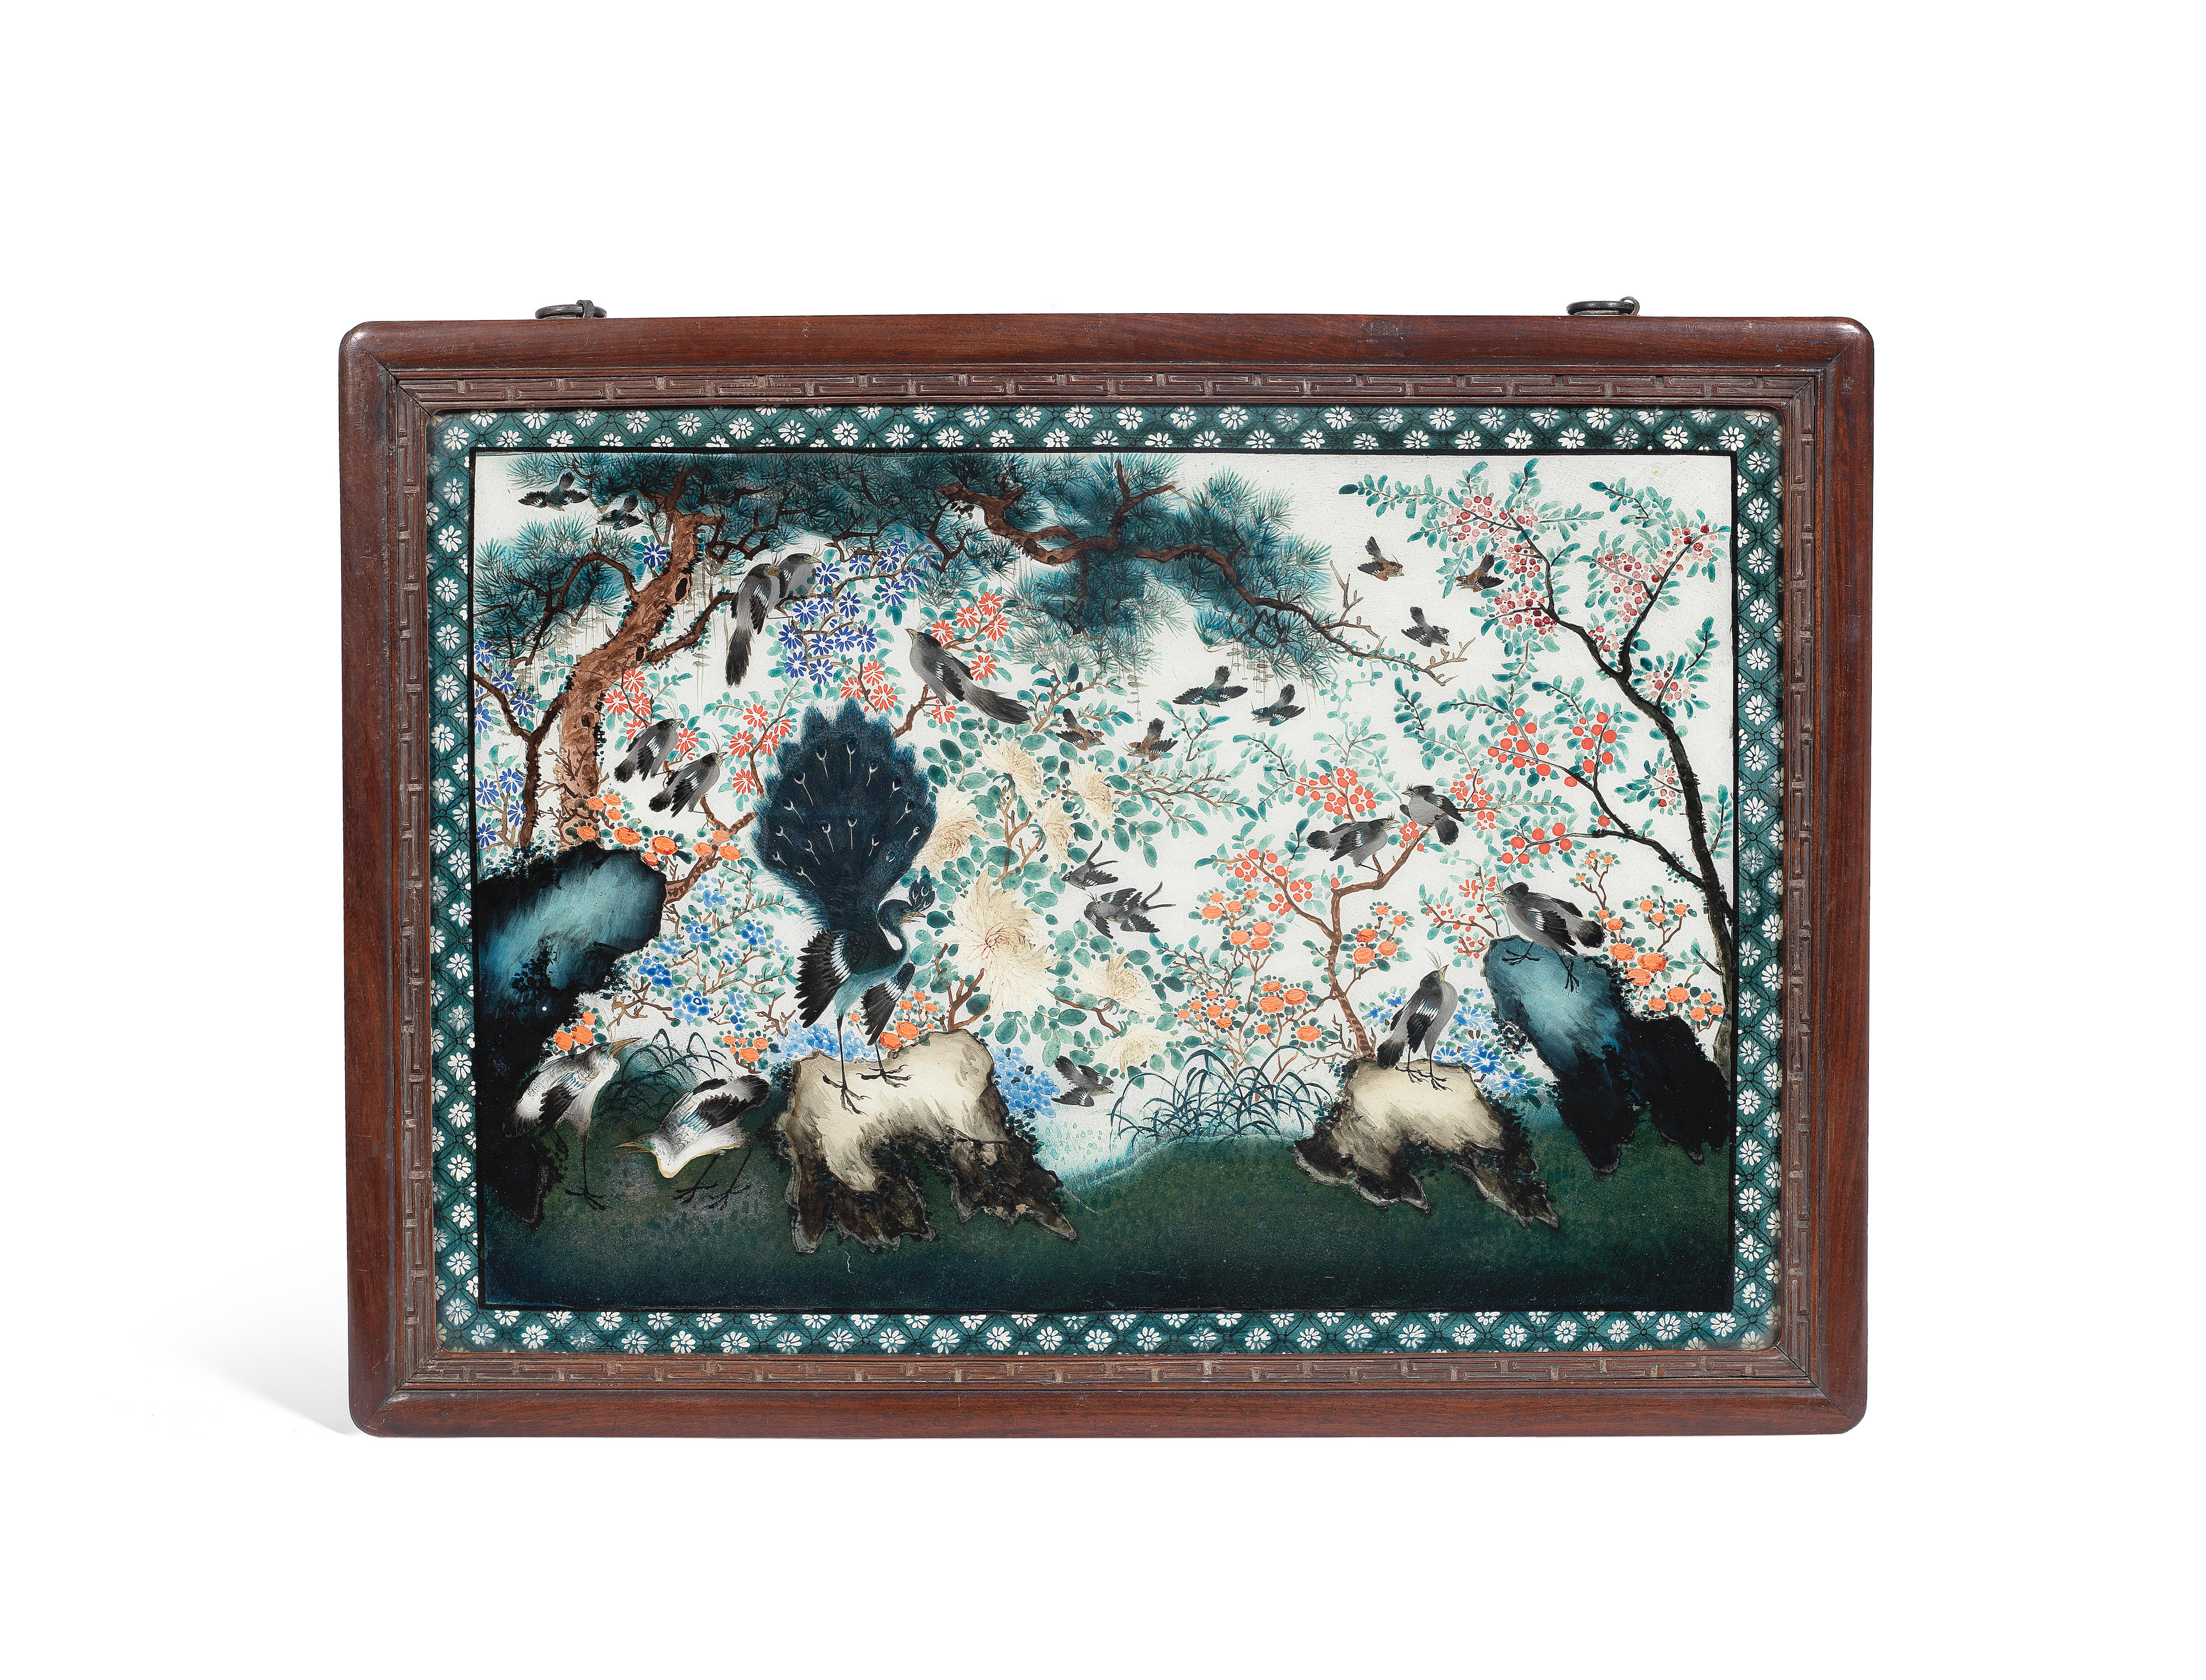 A Chinese export reverse glass painting of birds